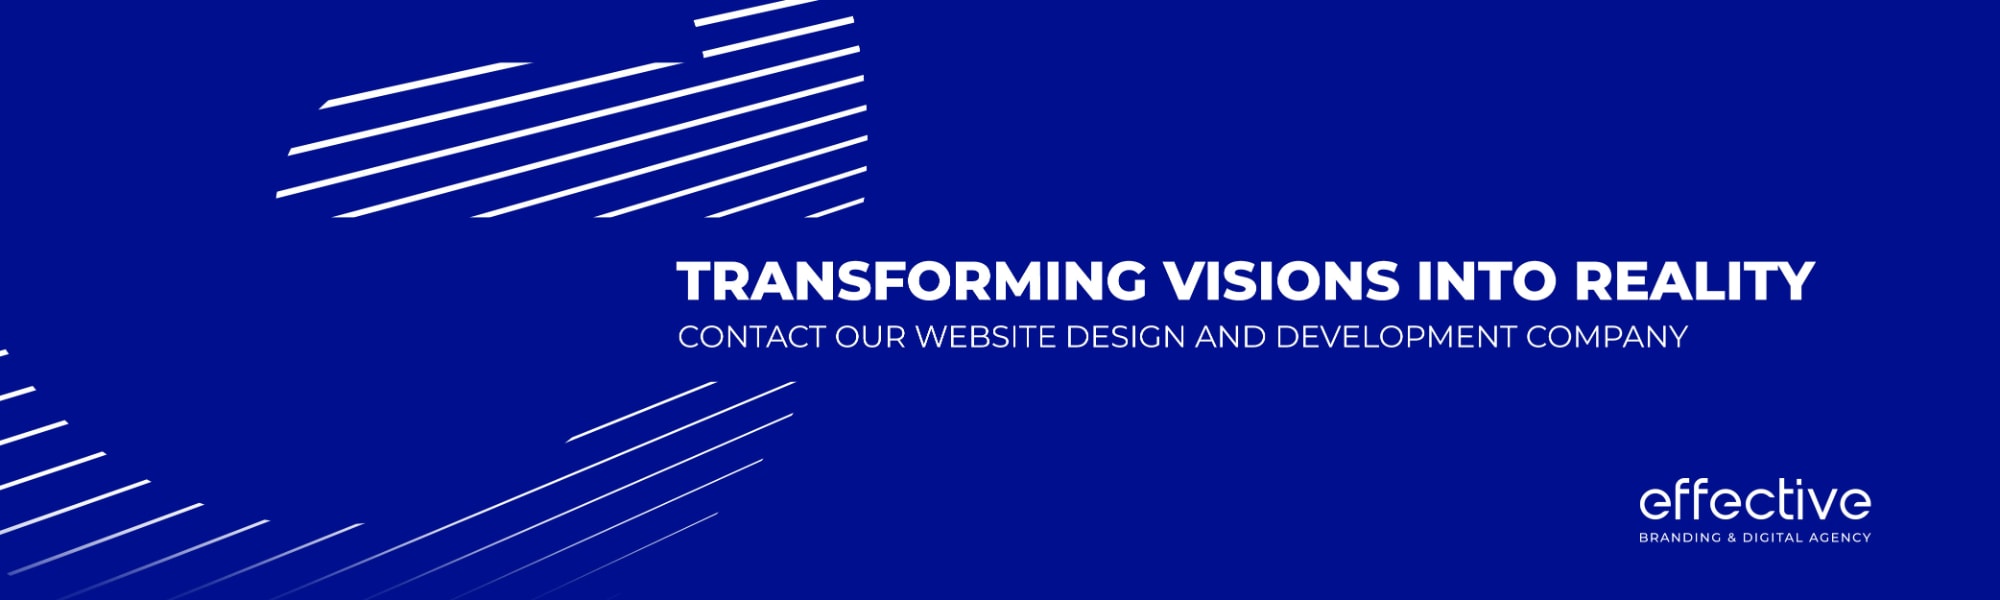 Transforming Visions into Reality Contact Our Website Design and Development Company